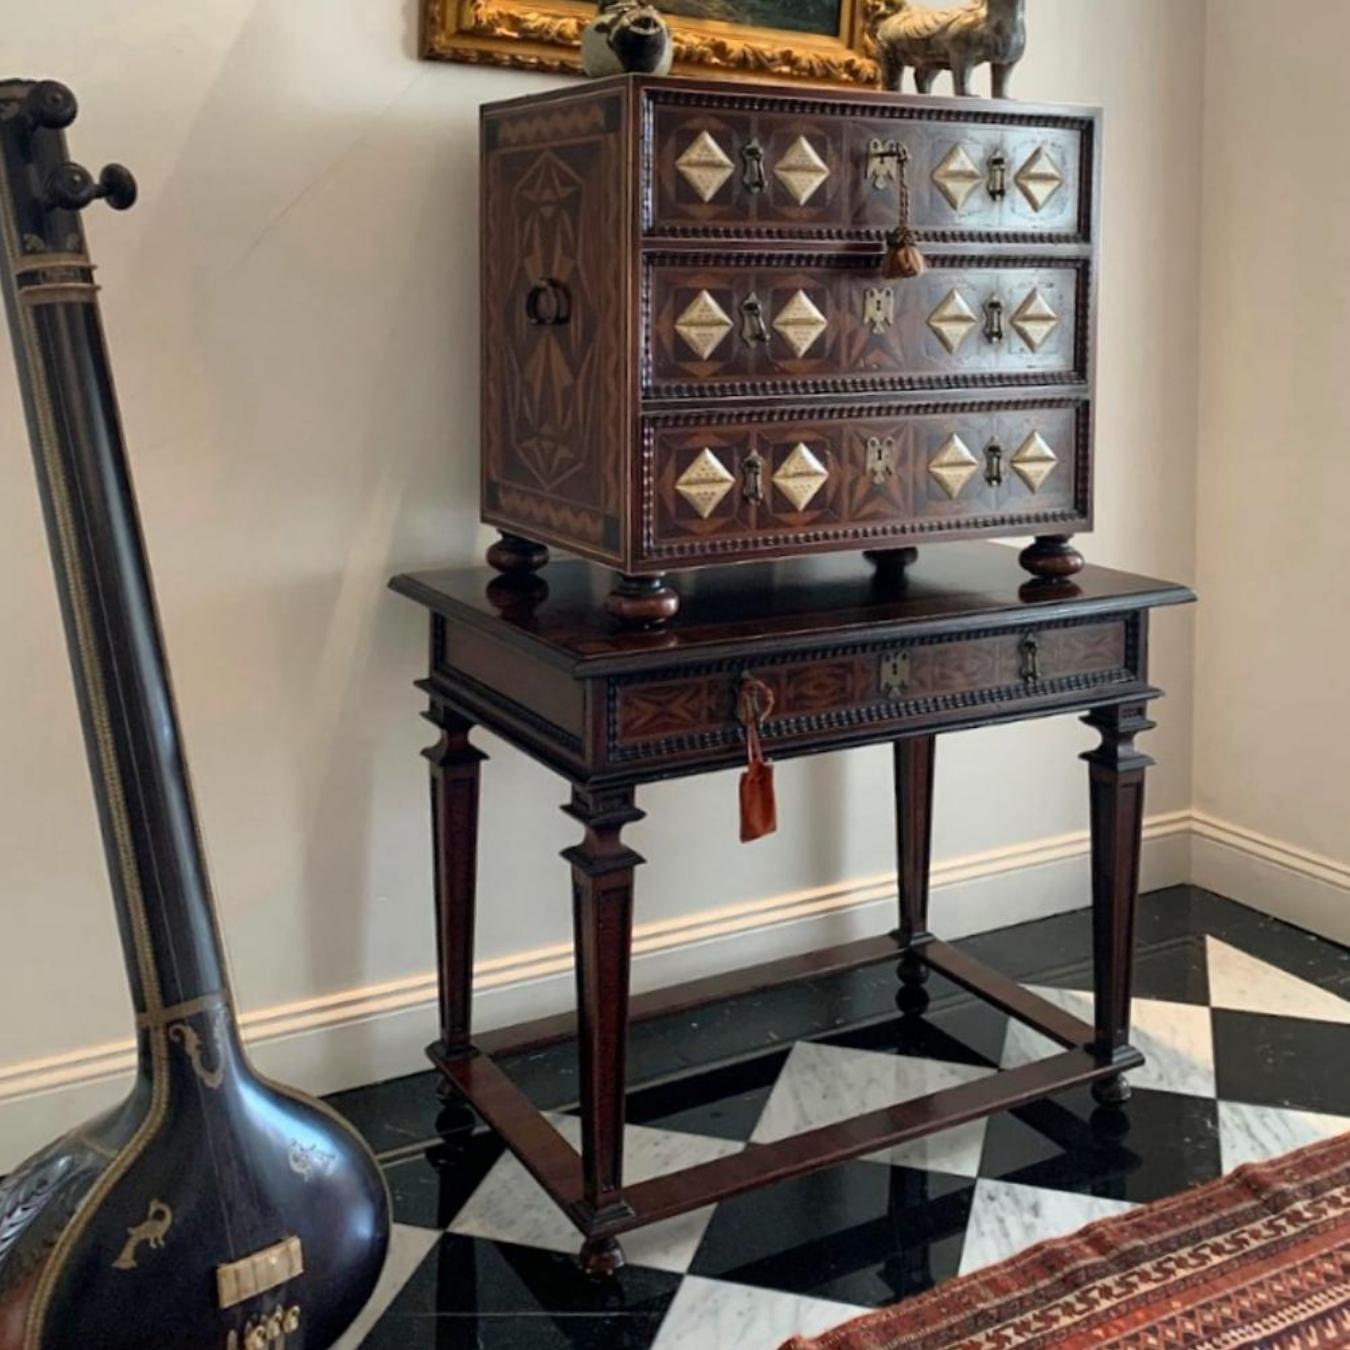 This console was inspired by the Novo Hispanic style of the XVIIIth Century. It is constructed from rosewood and guacanastle wood, with hand crafted Portuguese moldings and geometric marquetry. The legs are squared columns that grow thinner towards